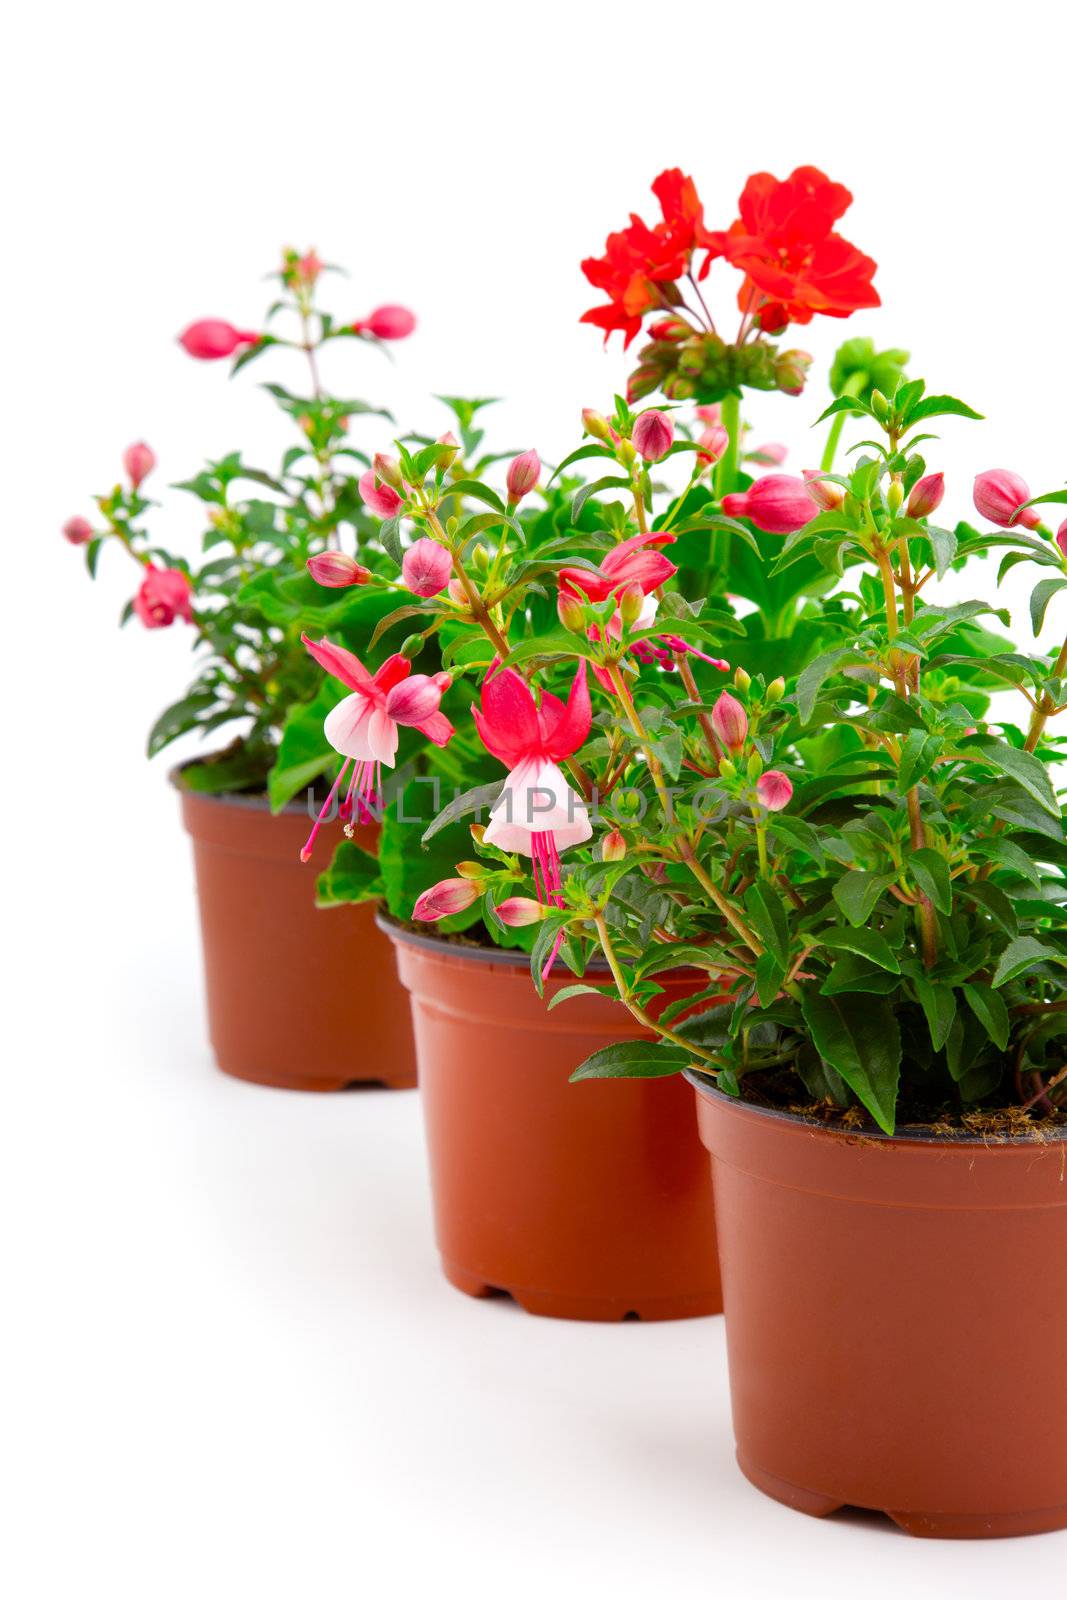 blooming fuchsia and geranium in the pot, isolated on a white ba by motorolka